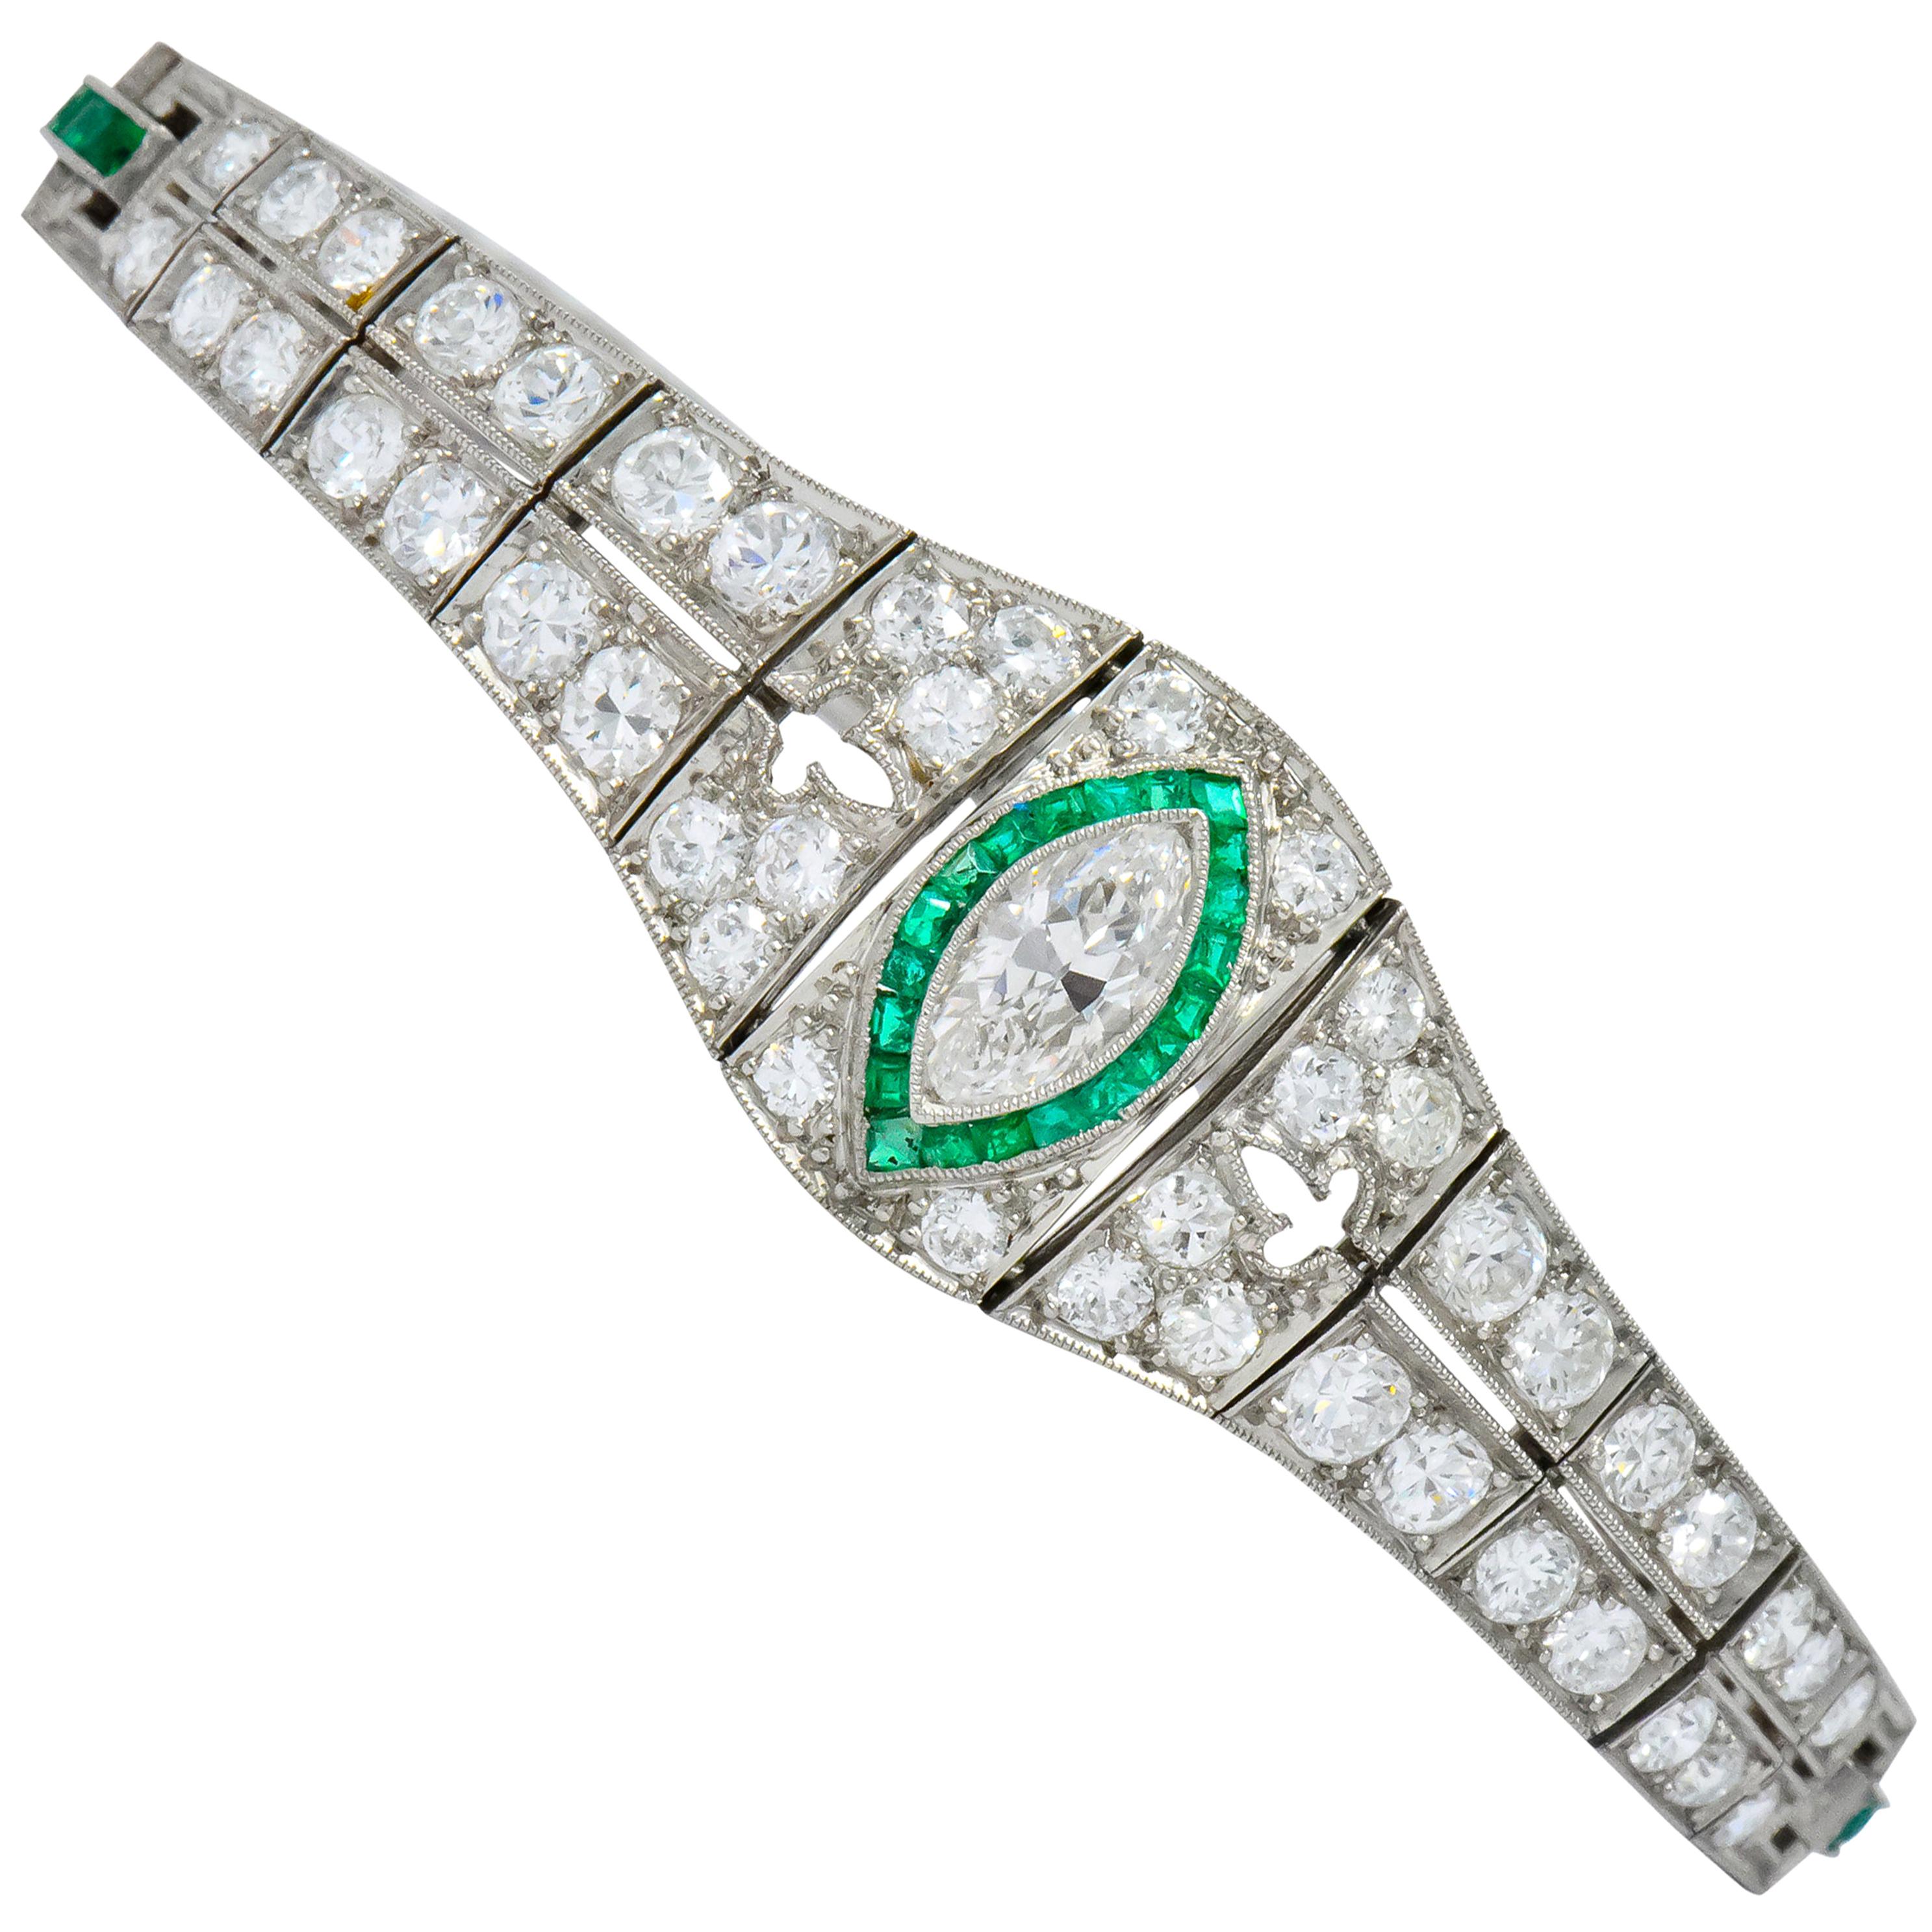 Centering a bezel set marquise cut diamond weighing approximately 0.62 carat, H/I color and VVS clarity

With calibré cut emerald surround, transparent with lush green color

Bead set throughout by round brilliant cut diamonds weighing approximately